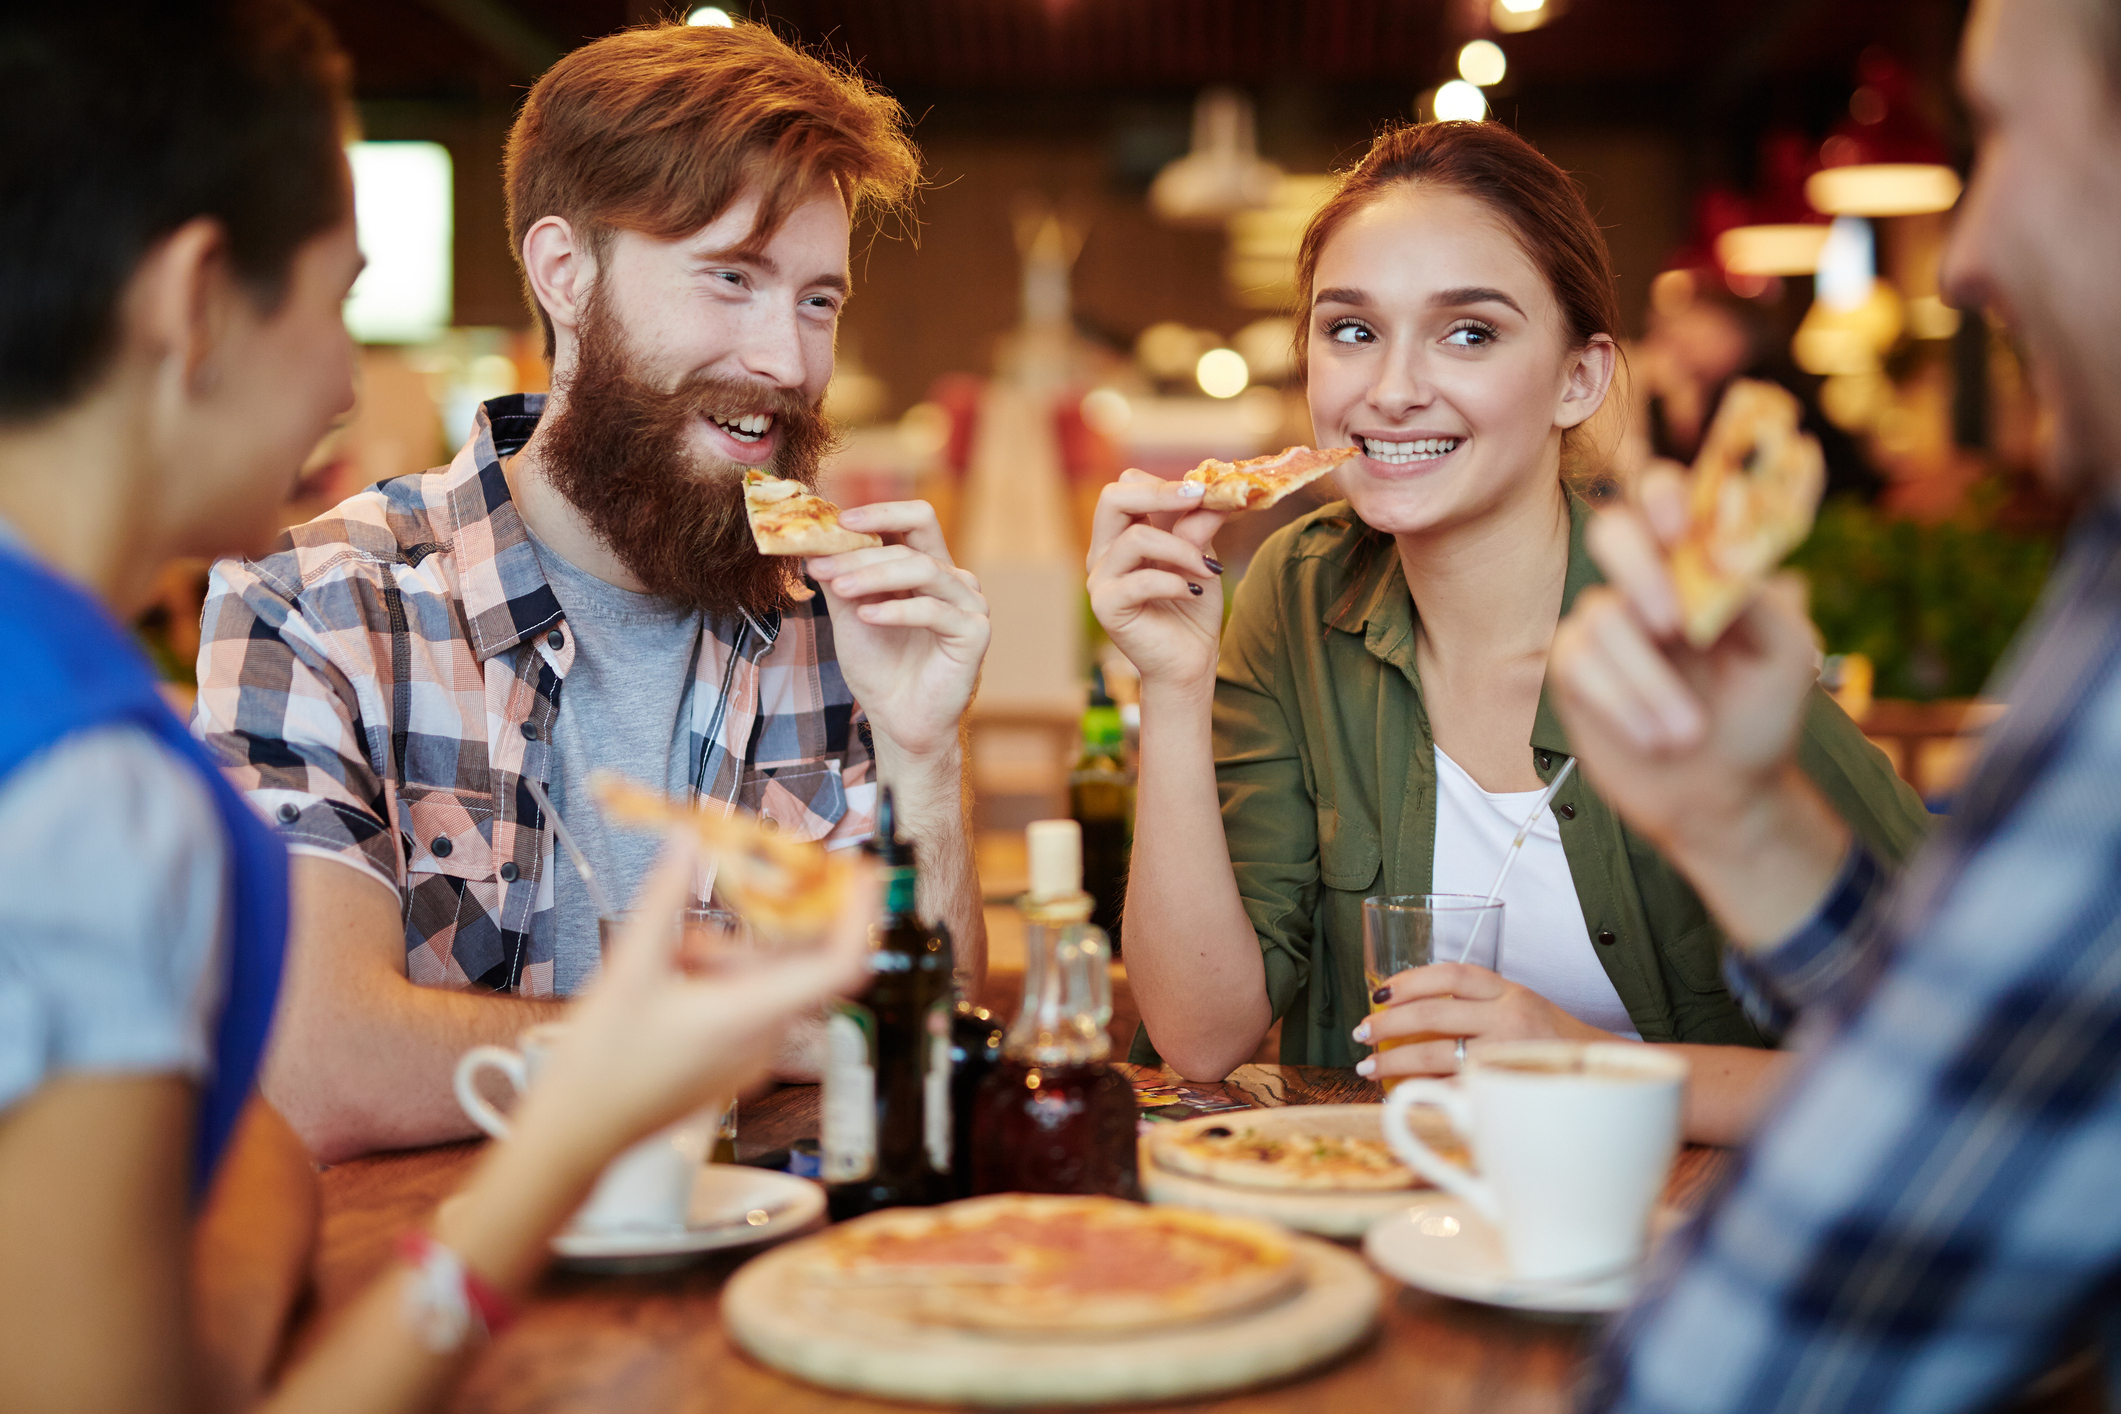 Generic photo of group of young friends at a pizza restaurant (Thinkstock/PA)